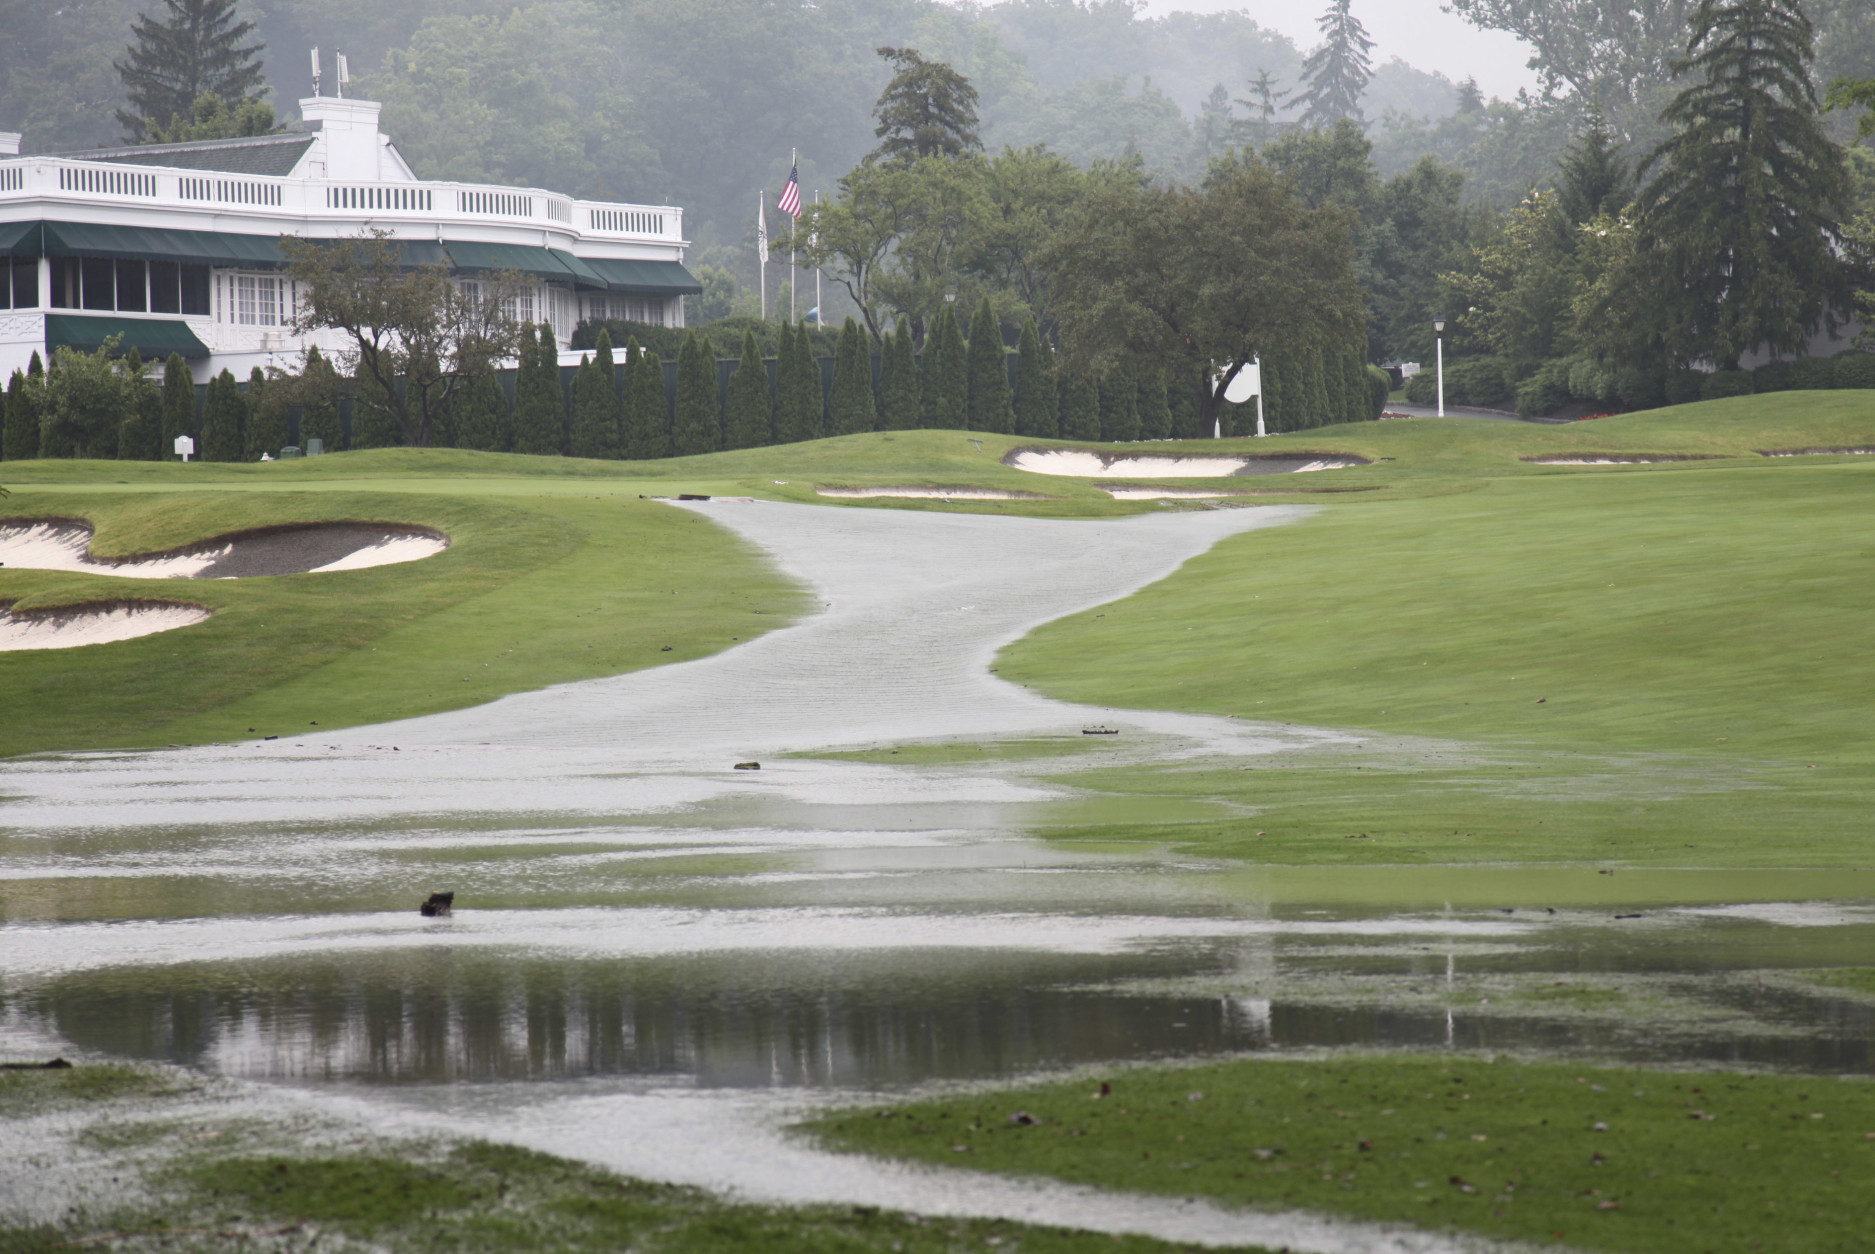 This Thursday June 23, 2016 image provided by the Greenbrier shows flooding on a fairway in front of the clubhouse of the Old White Course at the Greenbrier in White Sulphur Springs, W. Va. Severe flooding hit the area that is scheduled to host a PGA tour event in two weeks. (Harry Watson/The Greenbrier via AP)